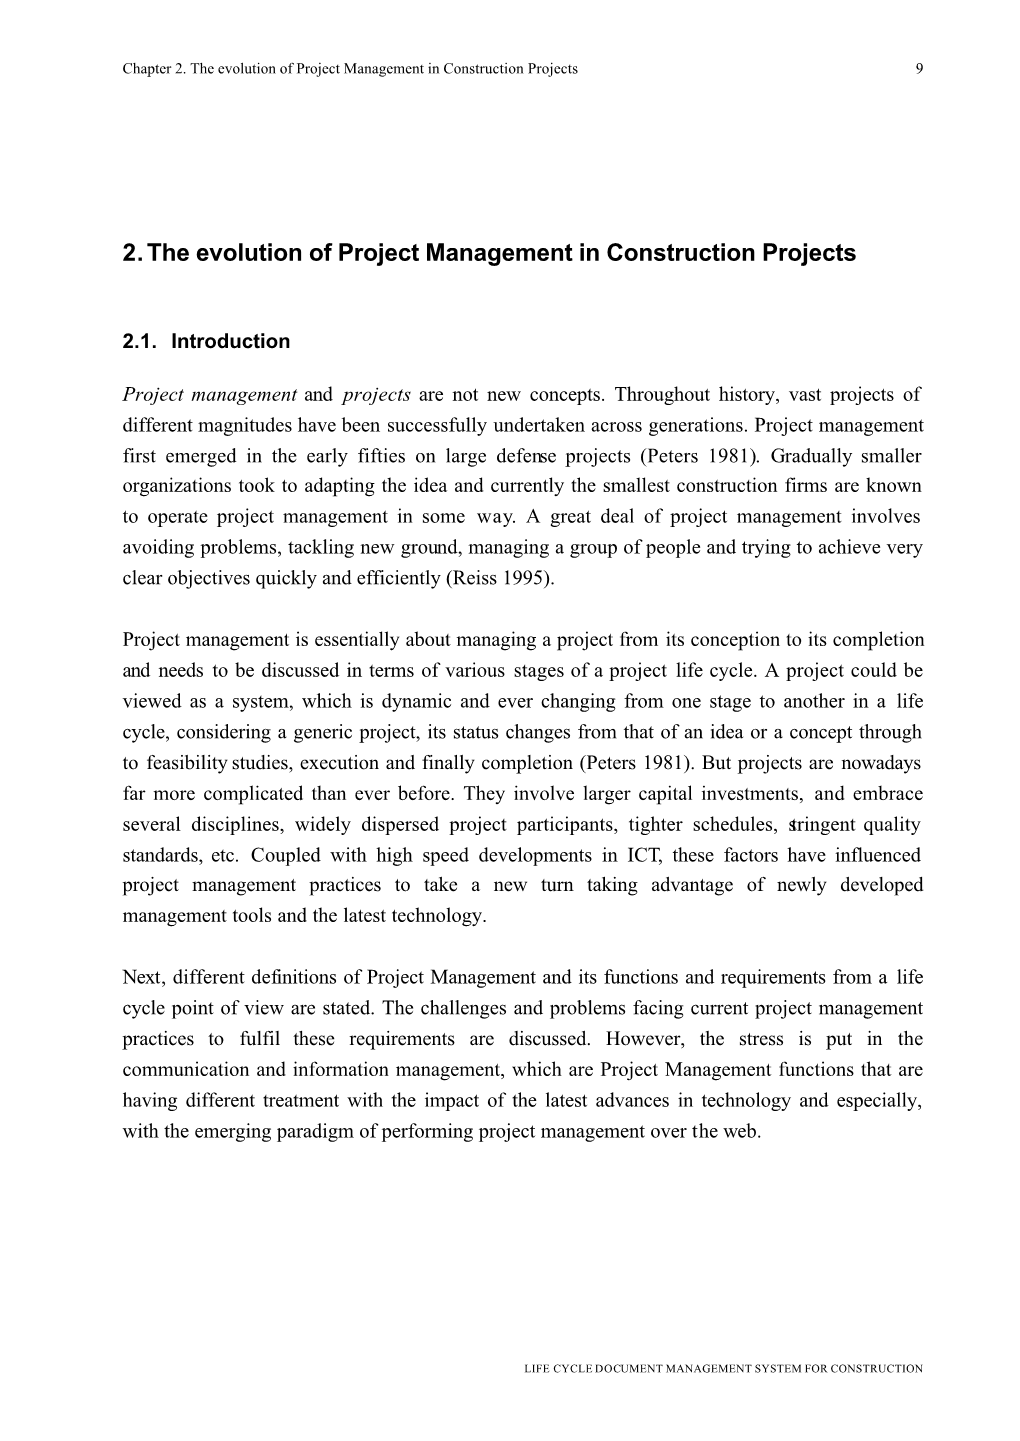 2. the Evolution of Project Management in Construction Projects 9